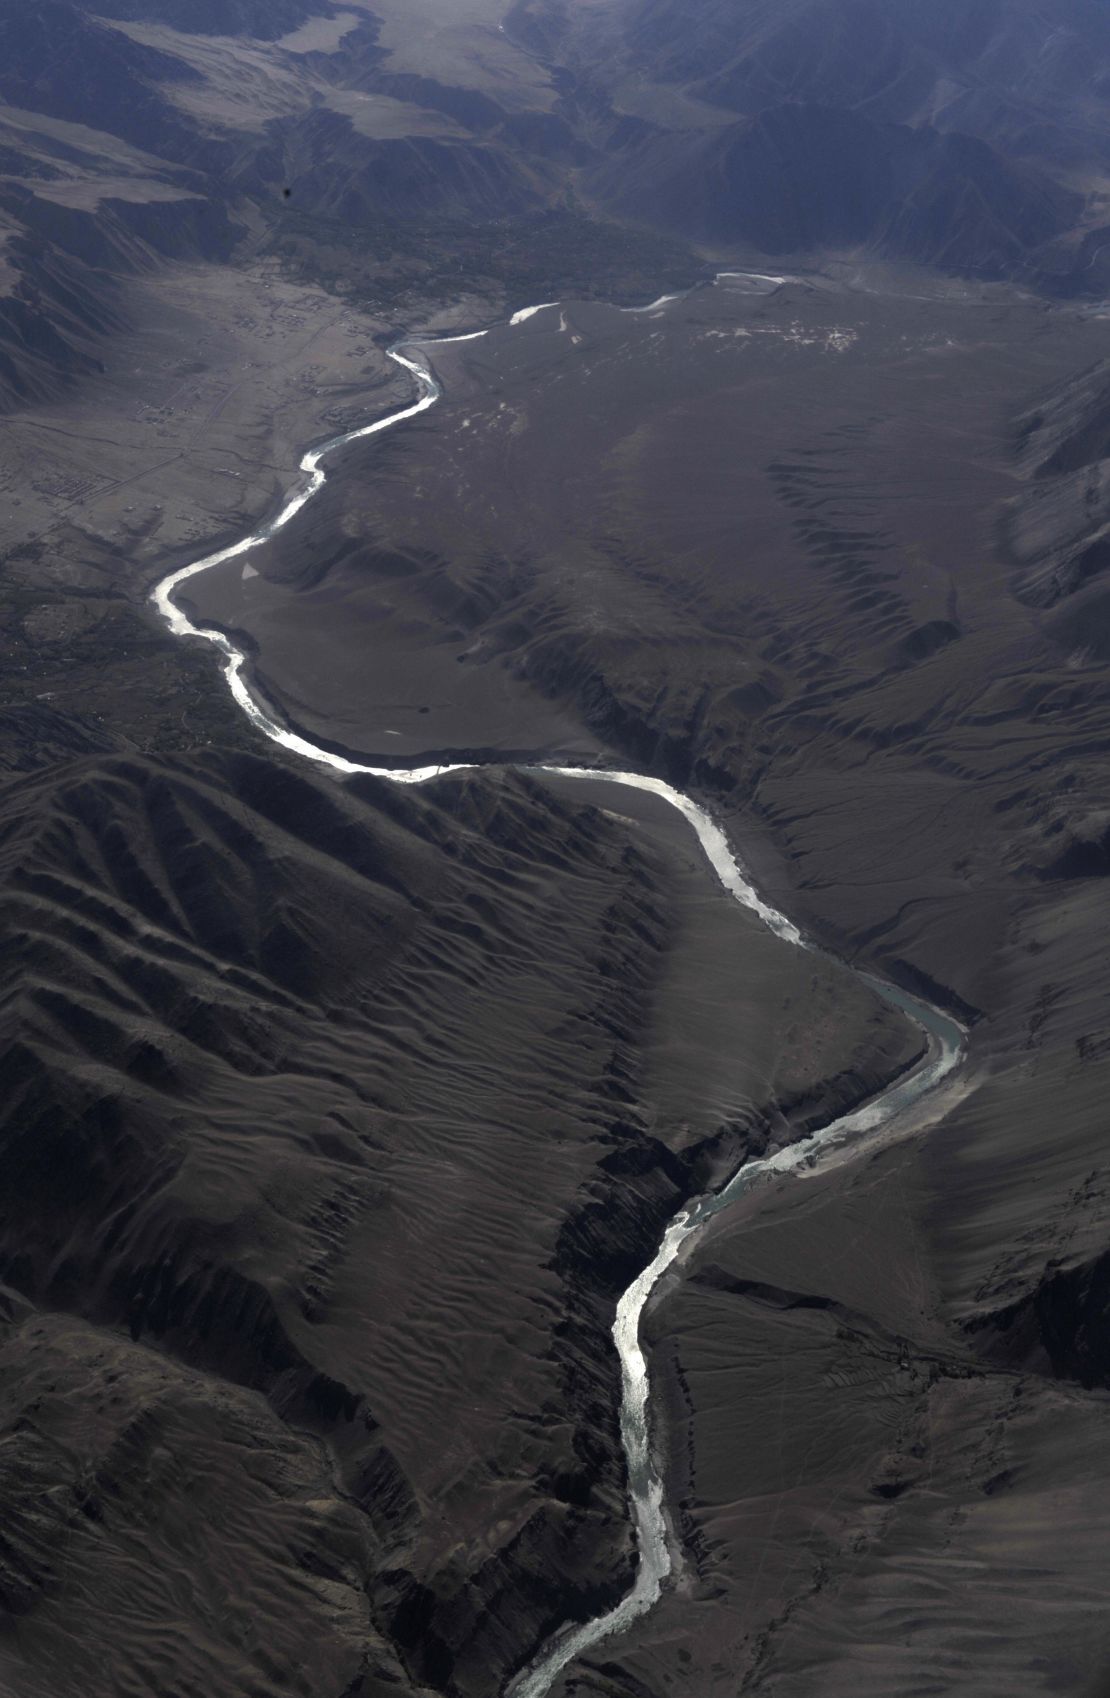 The River Indus.